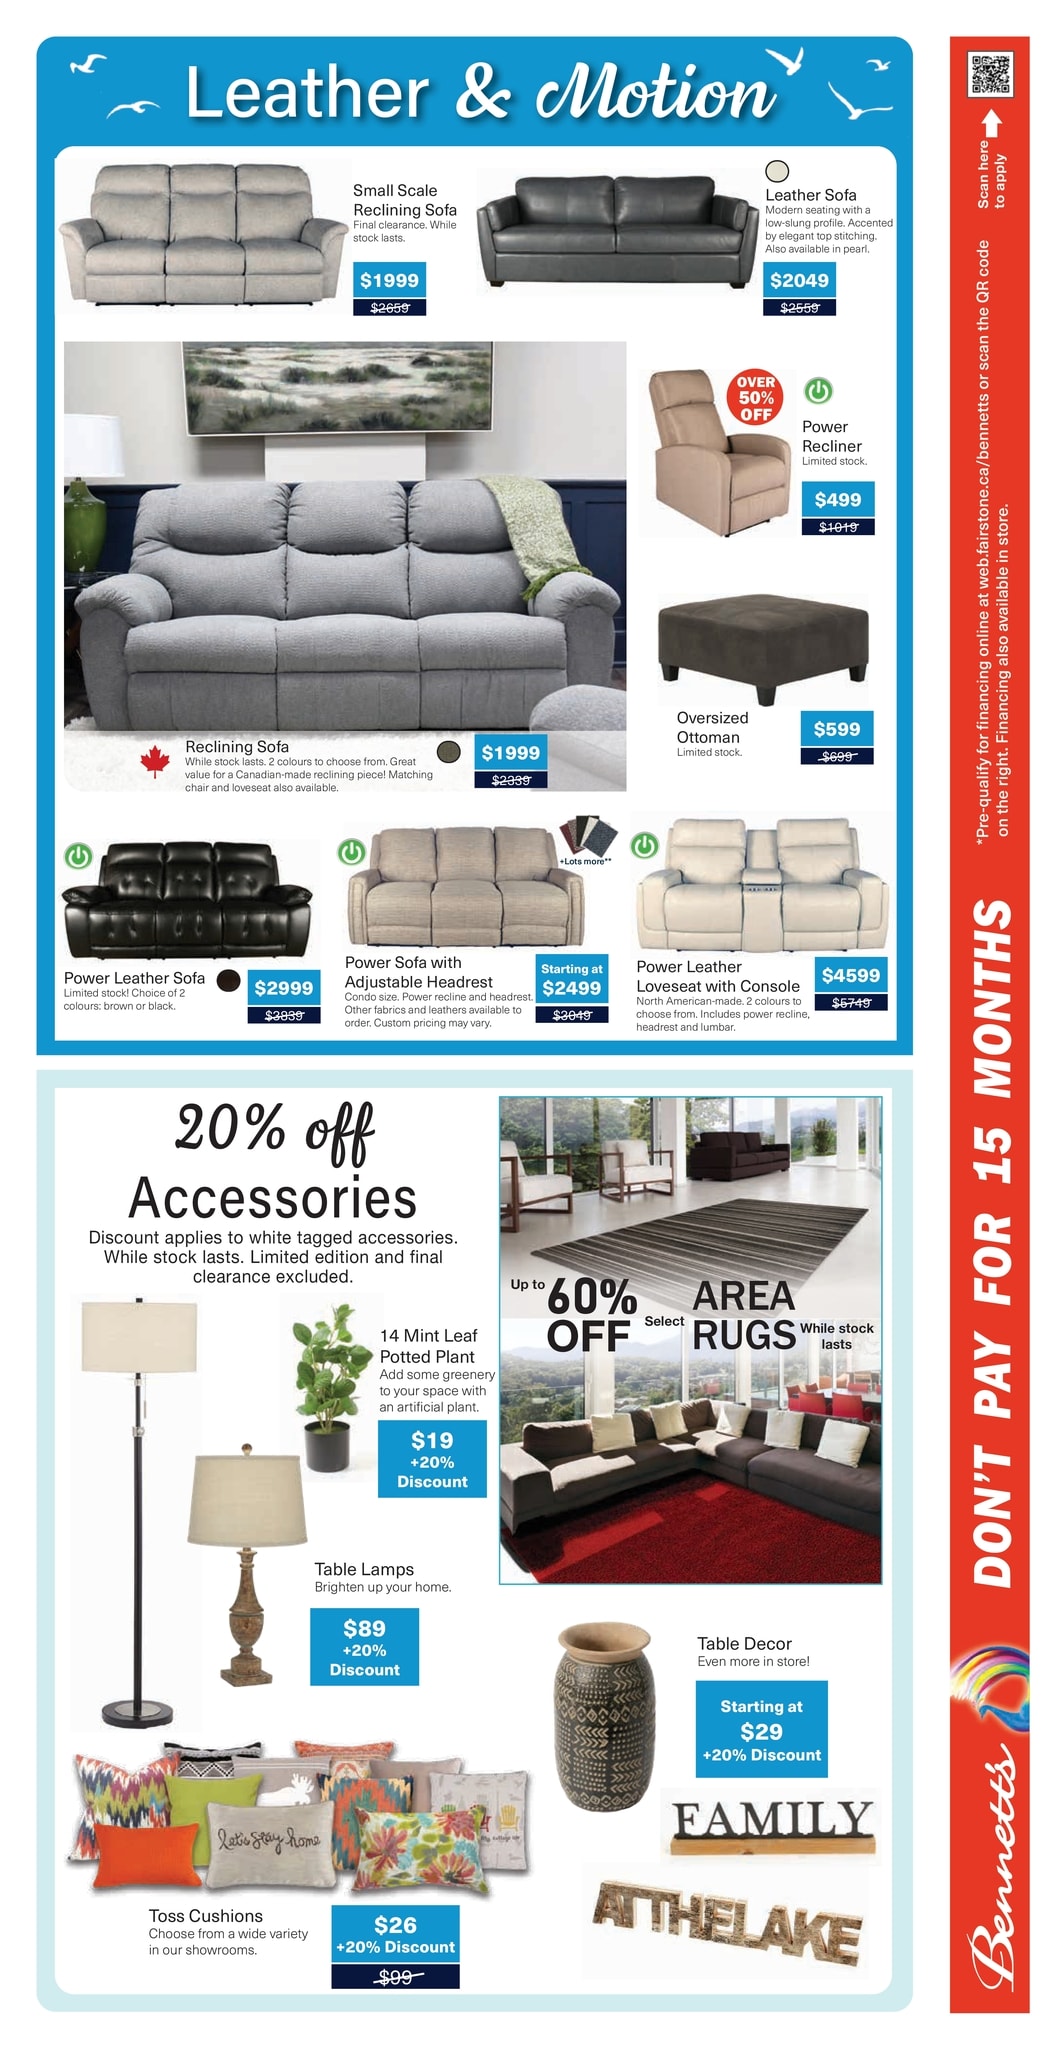 Bennett's Furniture and Mattresses - Monthly Savings - Page 5